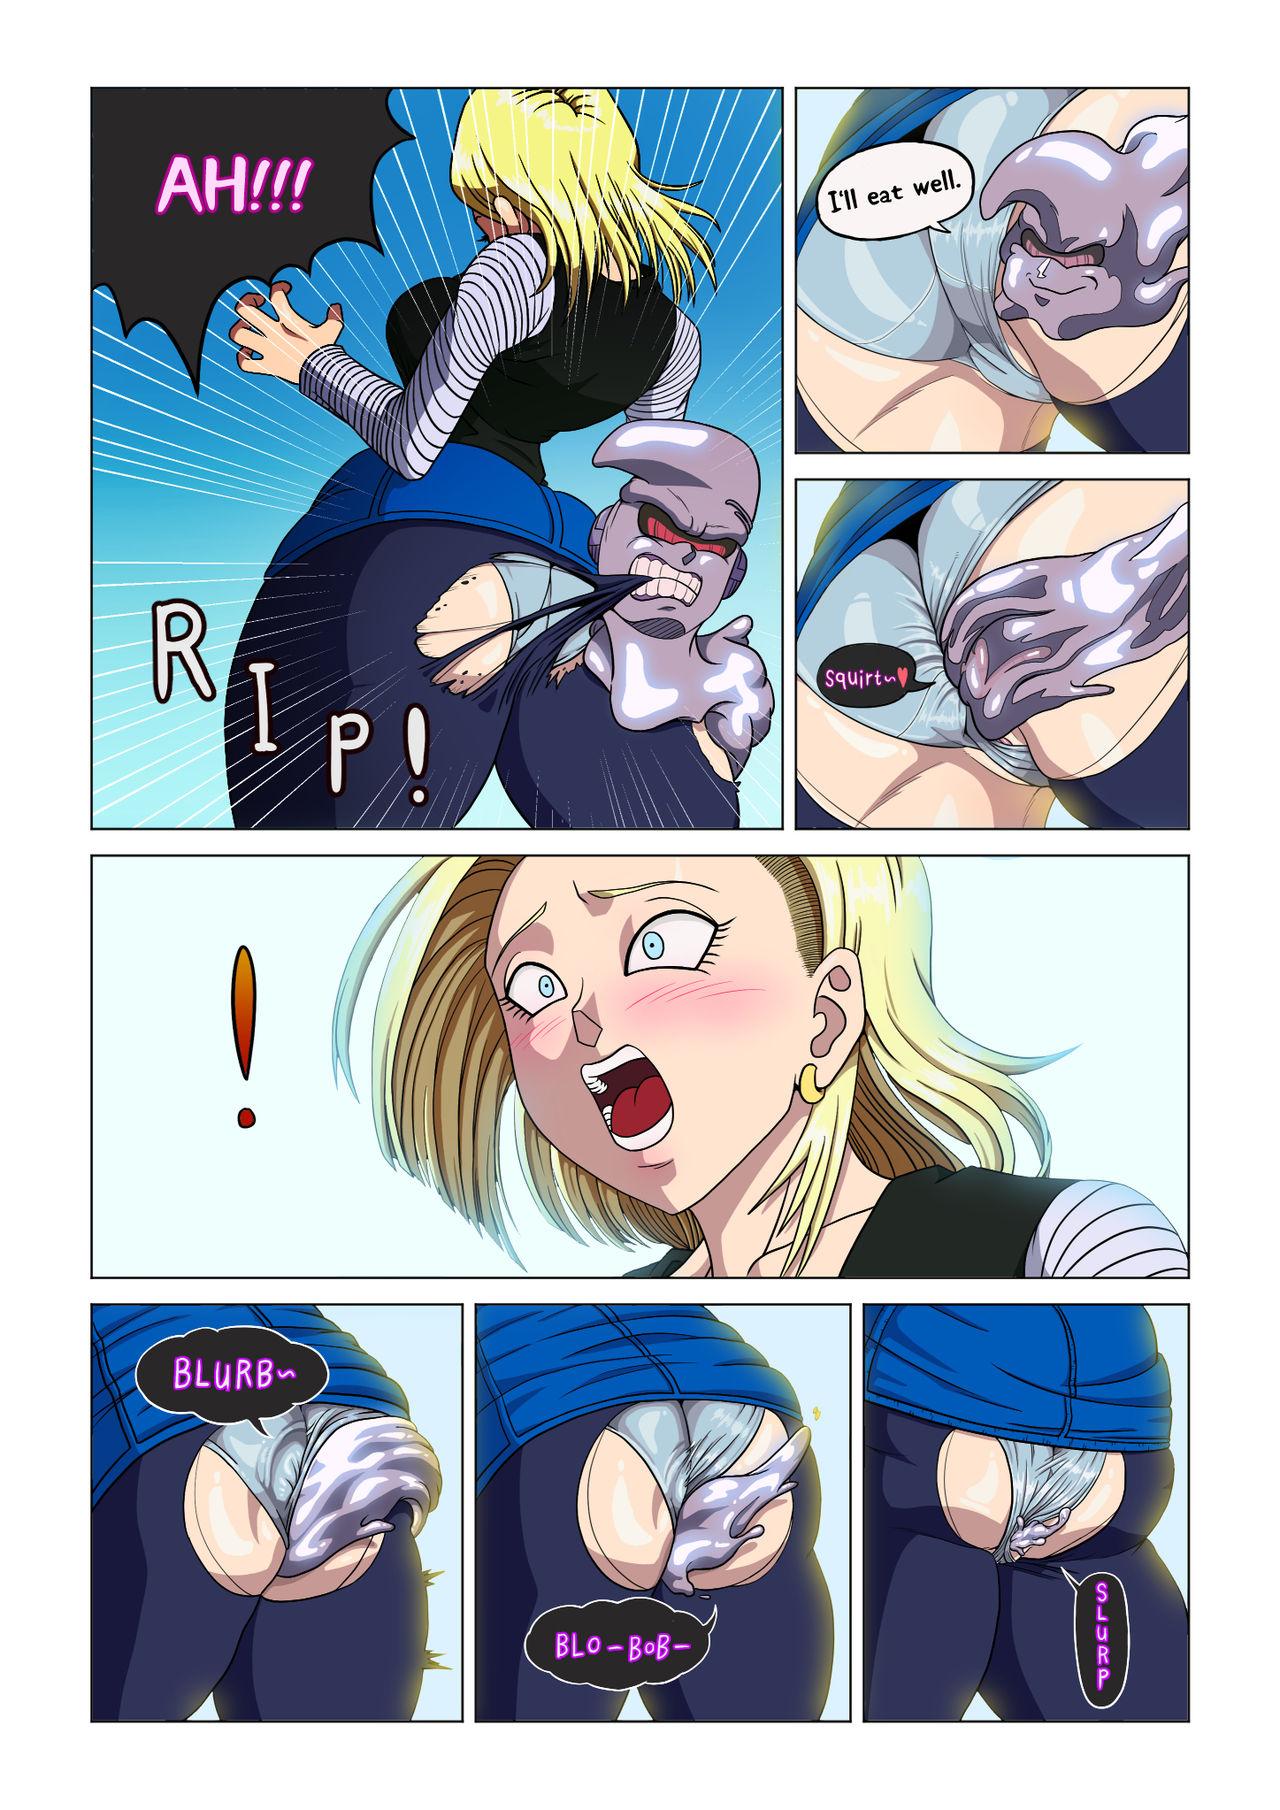 Android 18 vs Baby 10